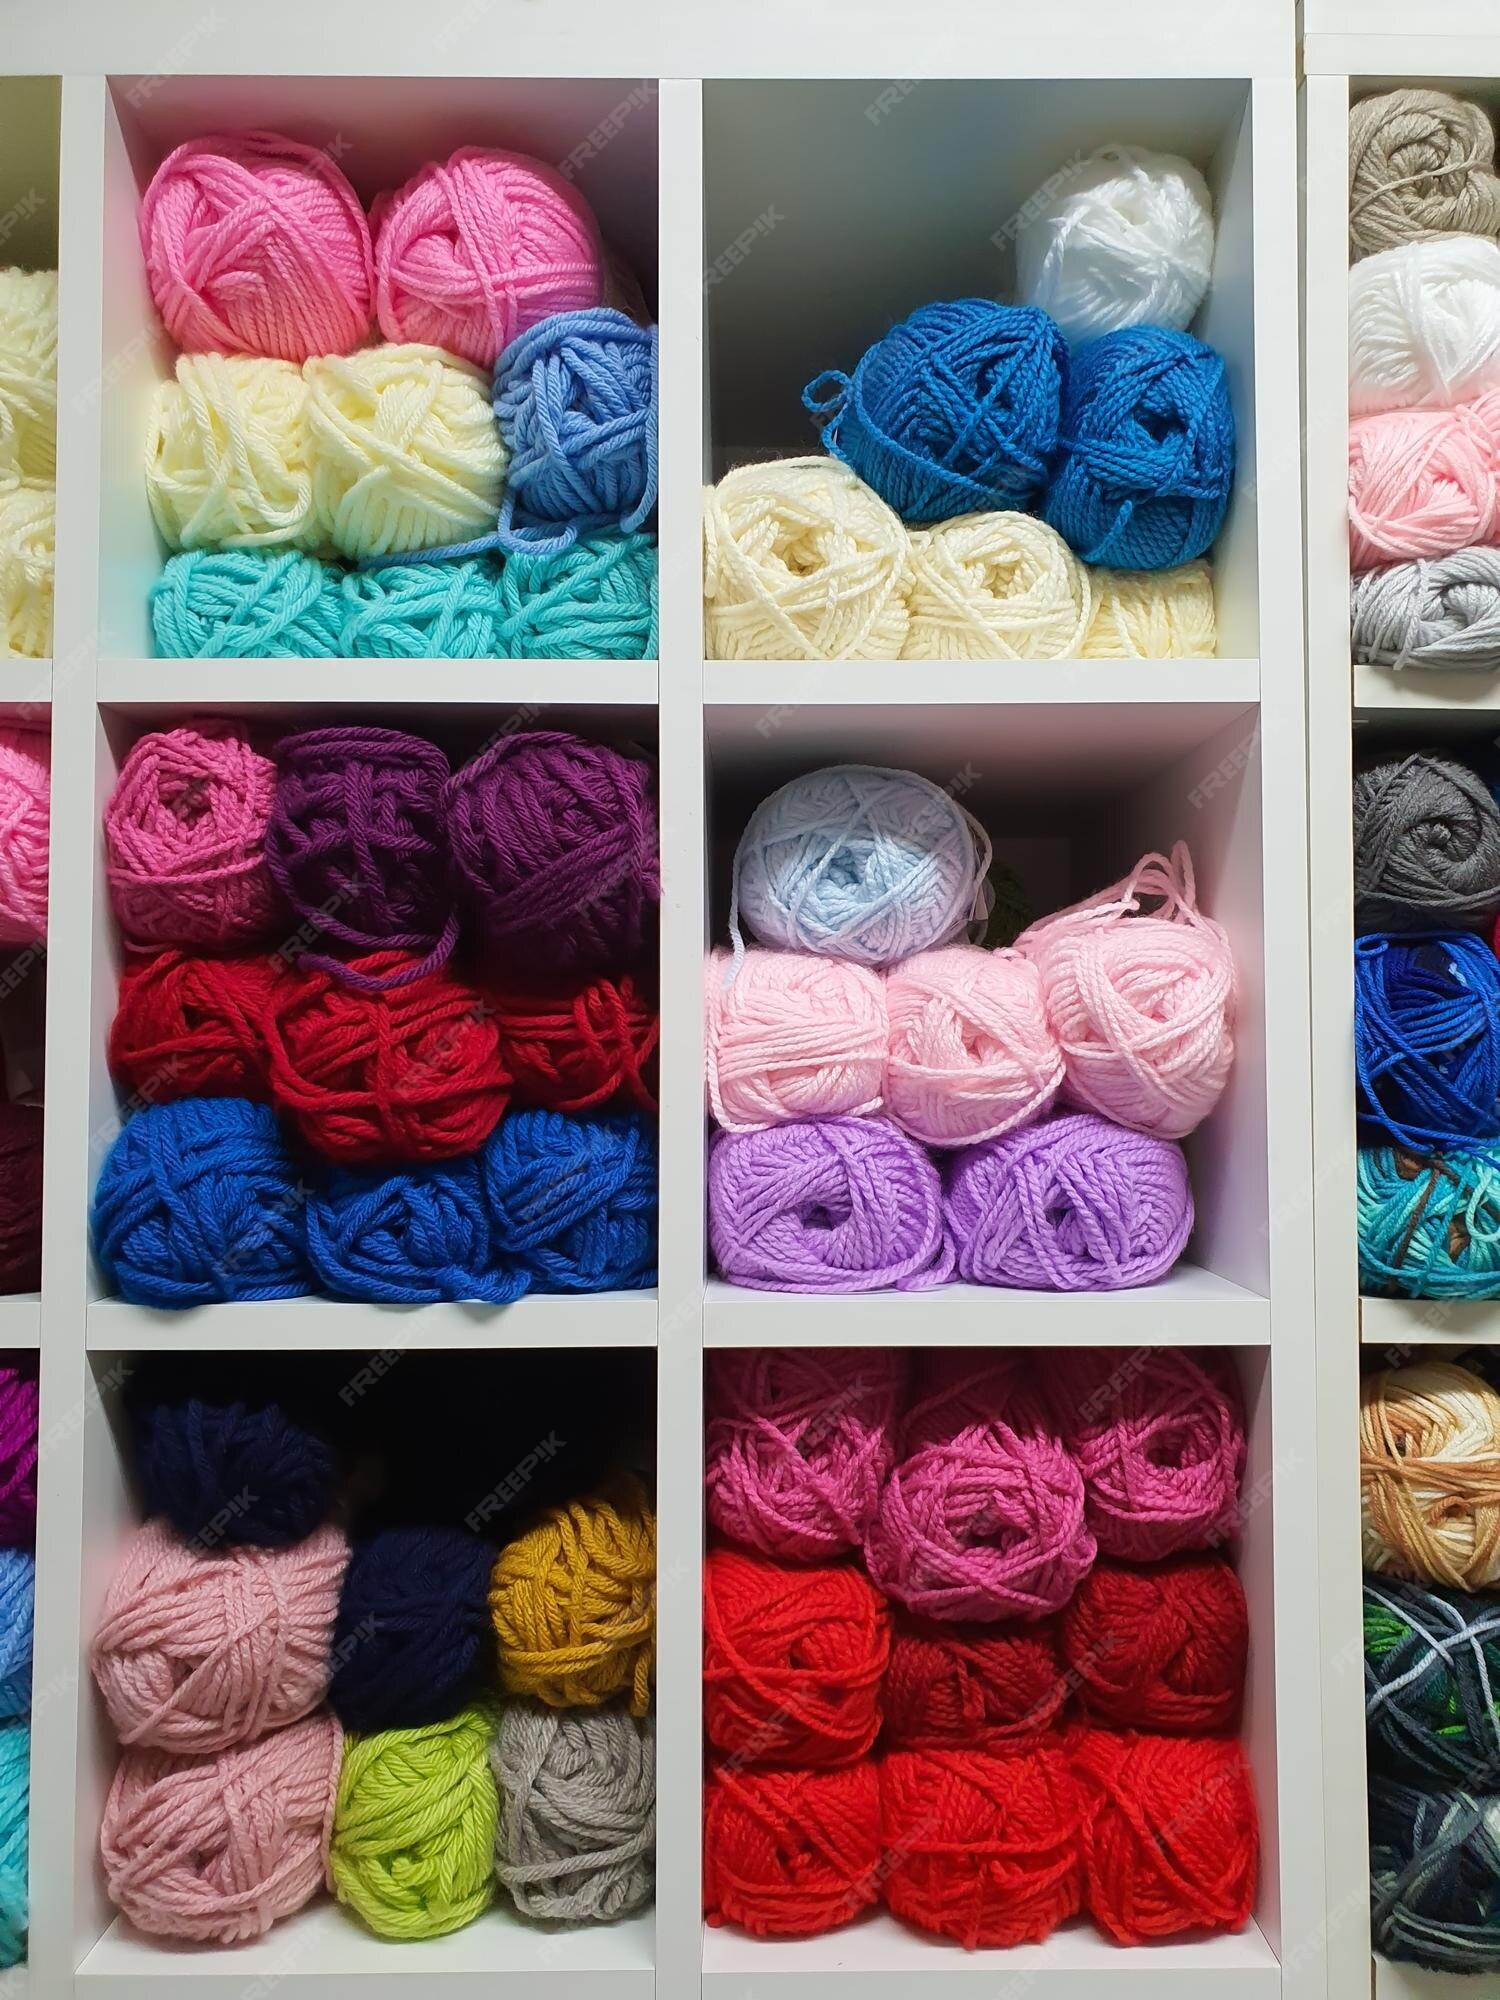 Premium Photo  Colorful yarns of wool for knitting on shelves in the  haberdashery shop knitwork handcraft concept